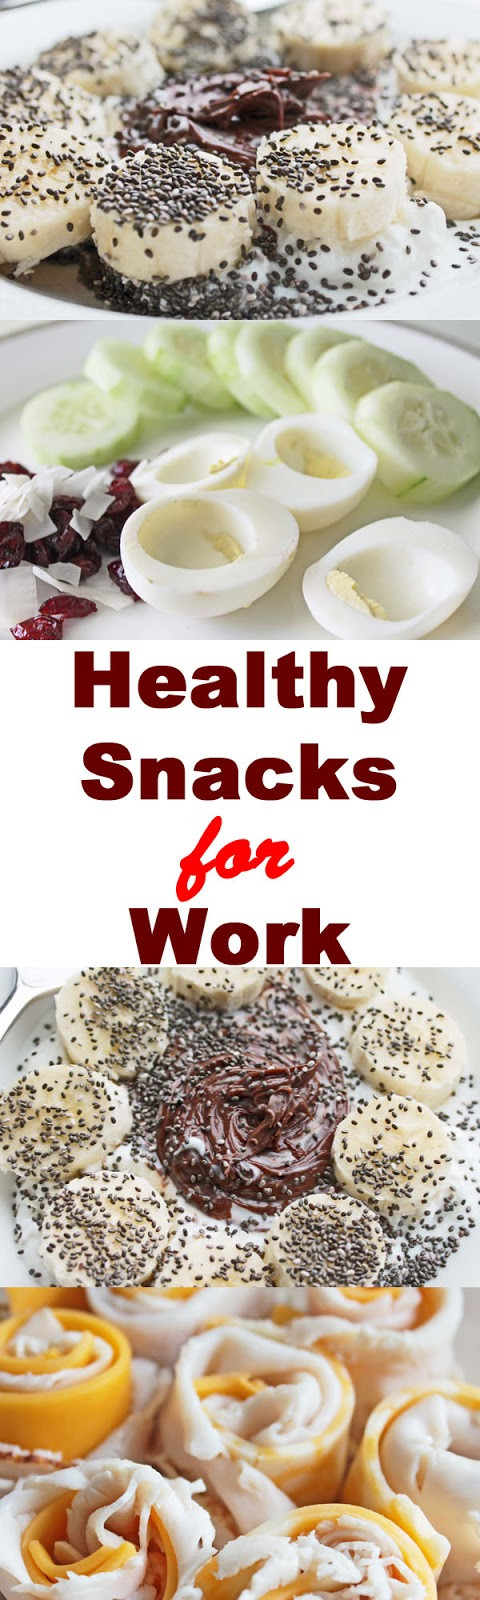 Healthy Snacks To Take To Work
 Healthy Snacks for Work Daily Re mendations 13